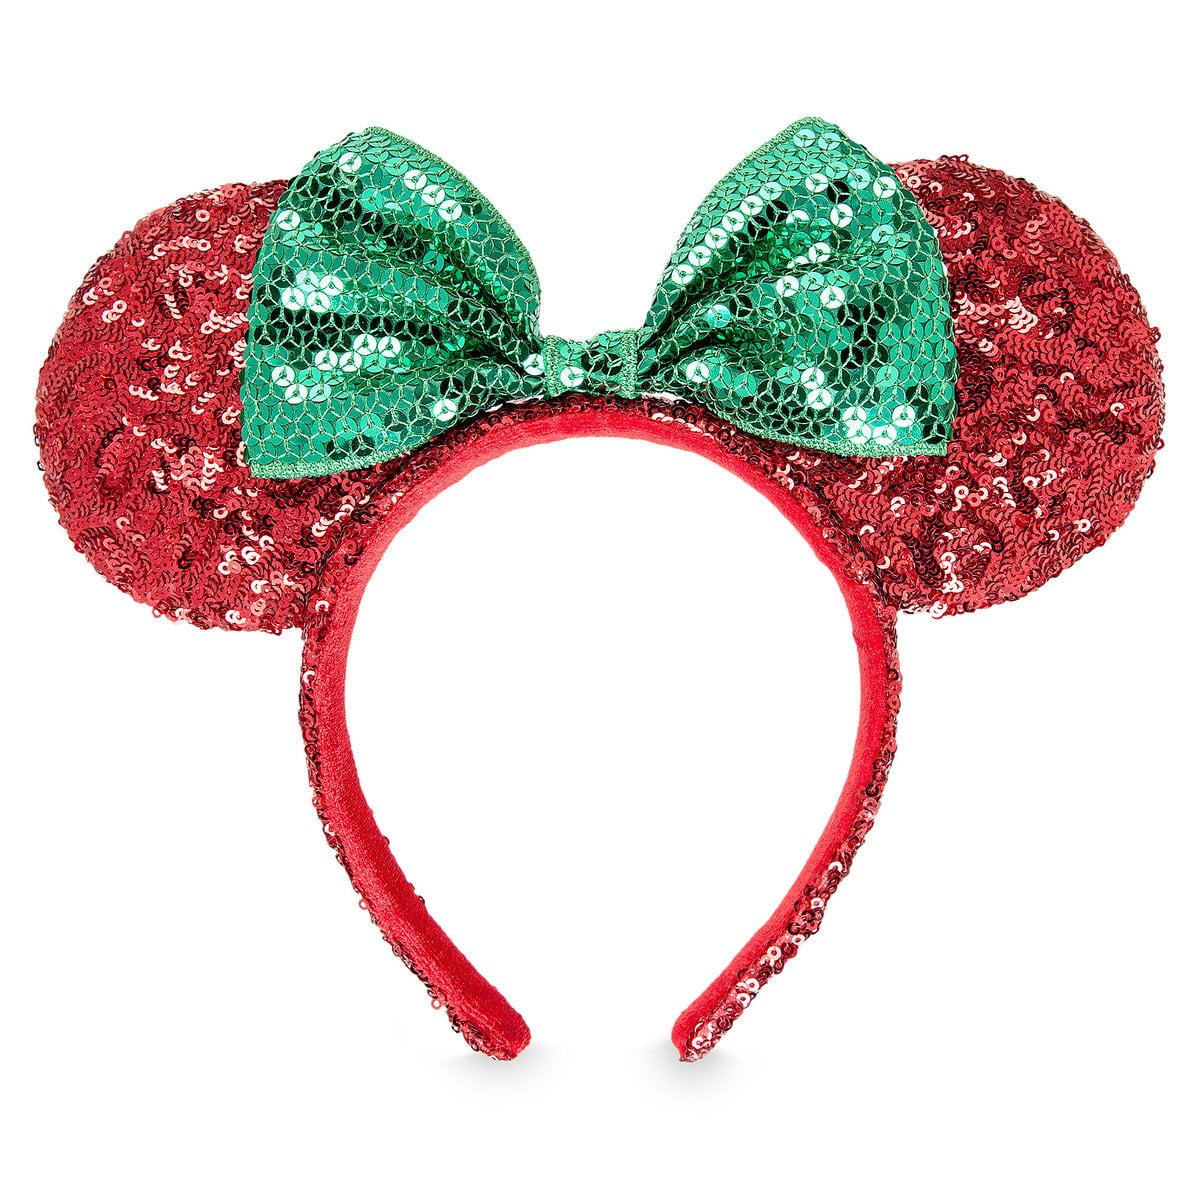 Details about   Sequins Bow Disney Parks 2019 Rare Minnie Ears Halloween Candy Corn Headband 